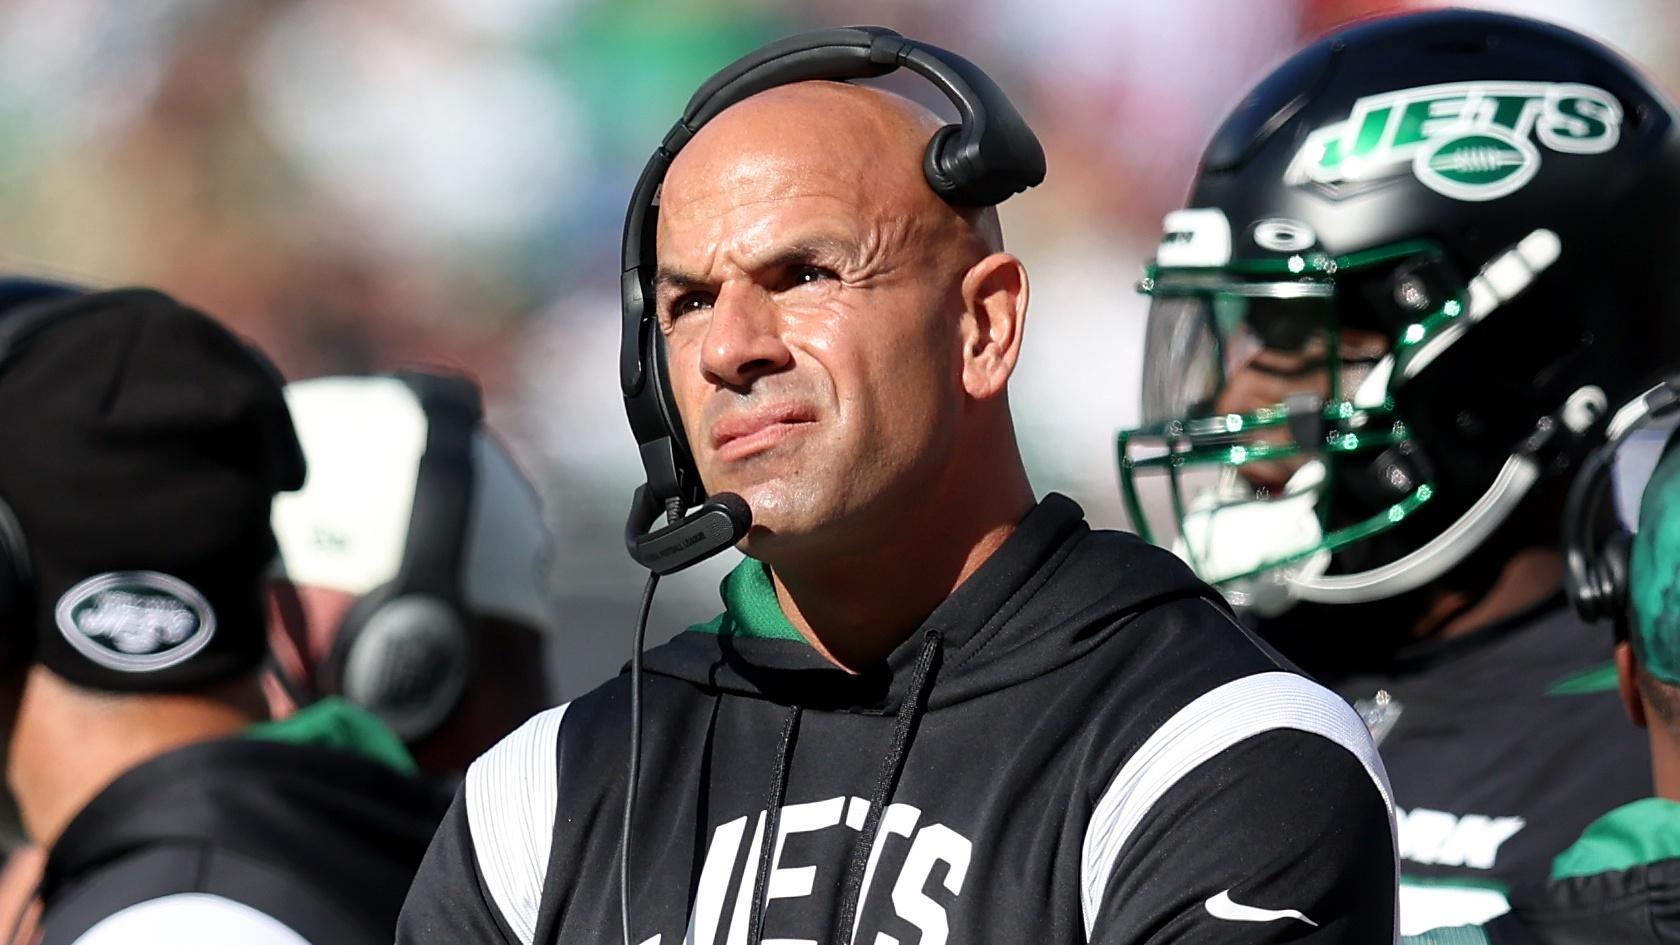 Oct 30, 2022; East Rutherford, New Jersey, USA; New York Jets head coach Robert Saleh reacts during the second quarter against the New England Patriots at MetLife Stadium. Mandatory Credit: Brad Penner-USA TODAY Sports / © Brad Penner-USA TODAY Sports